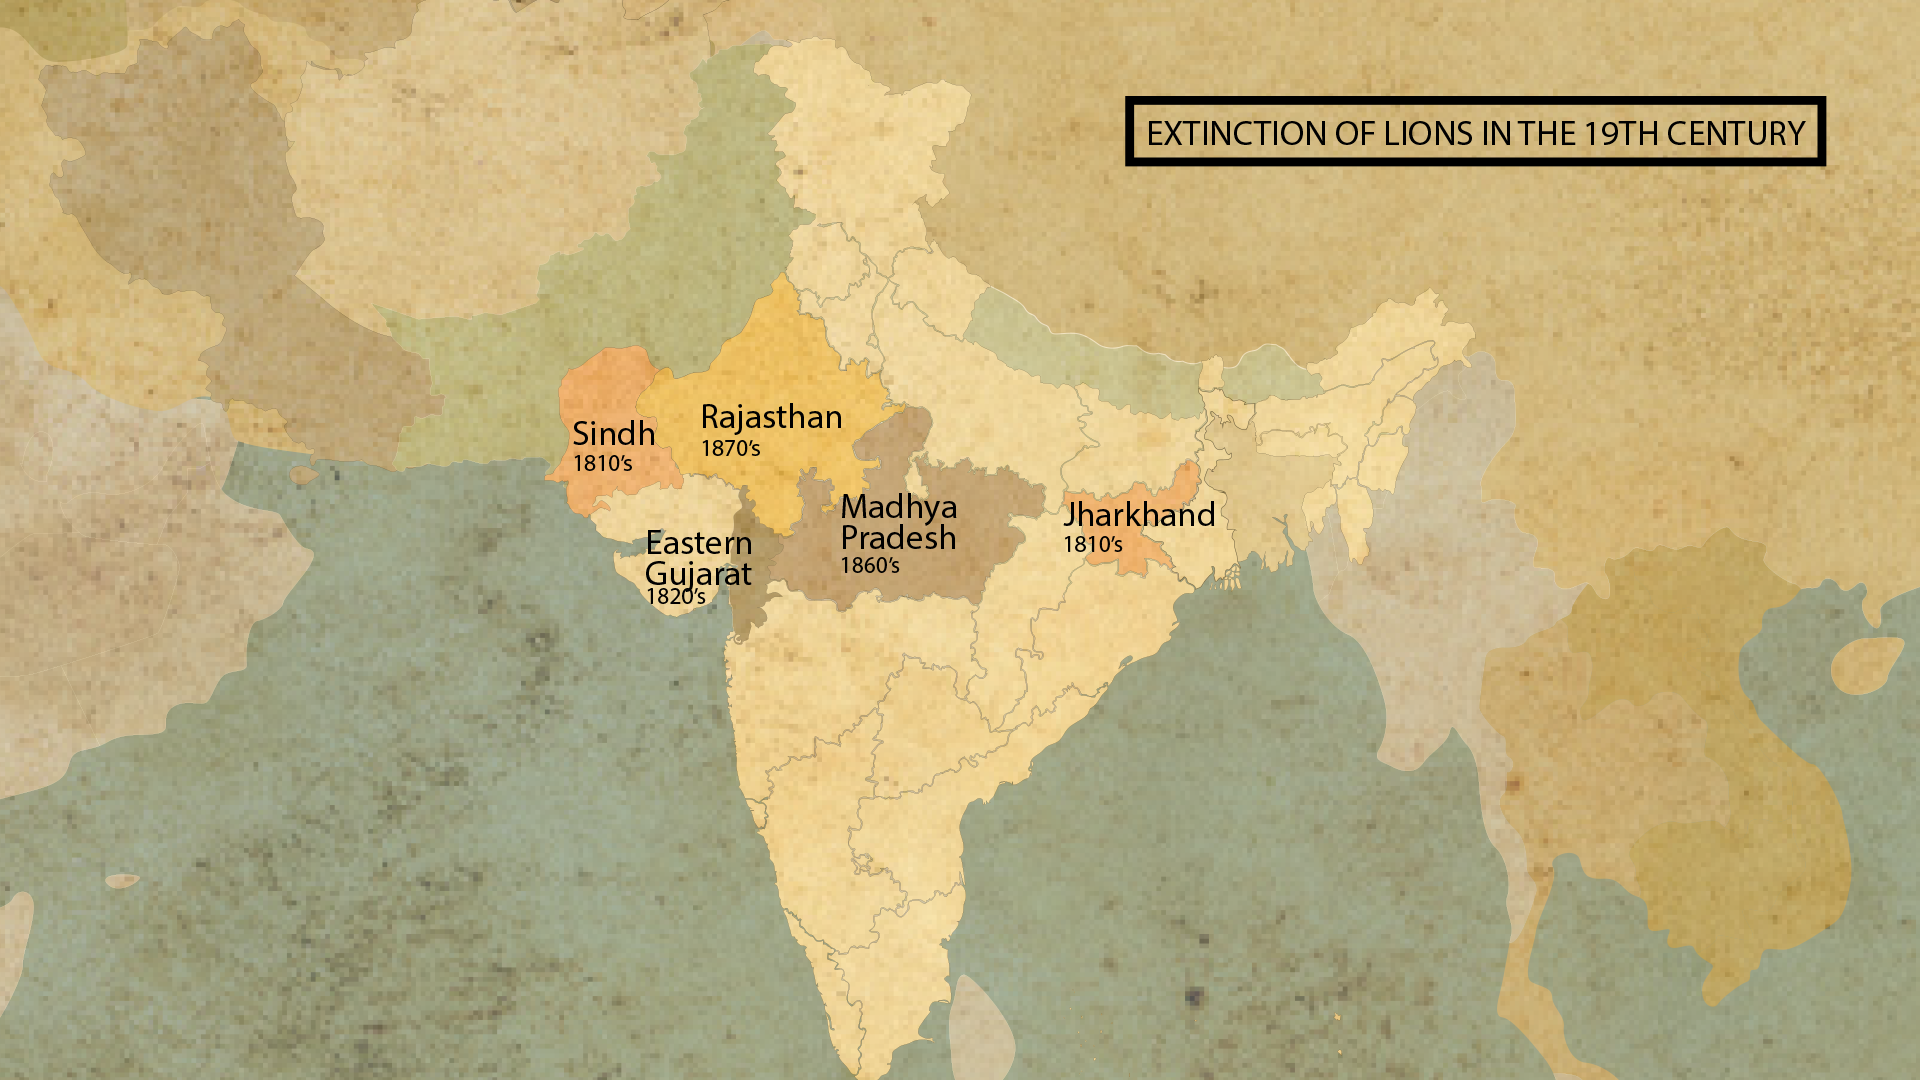 Extinction of lions from rest of India except Gir in the 19th century